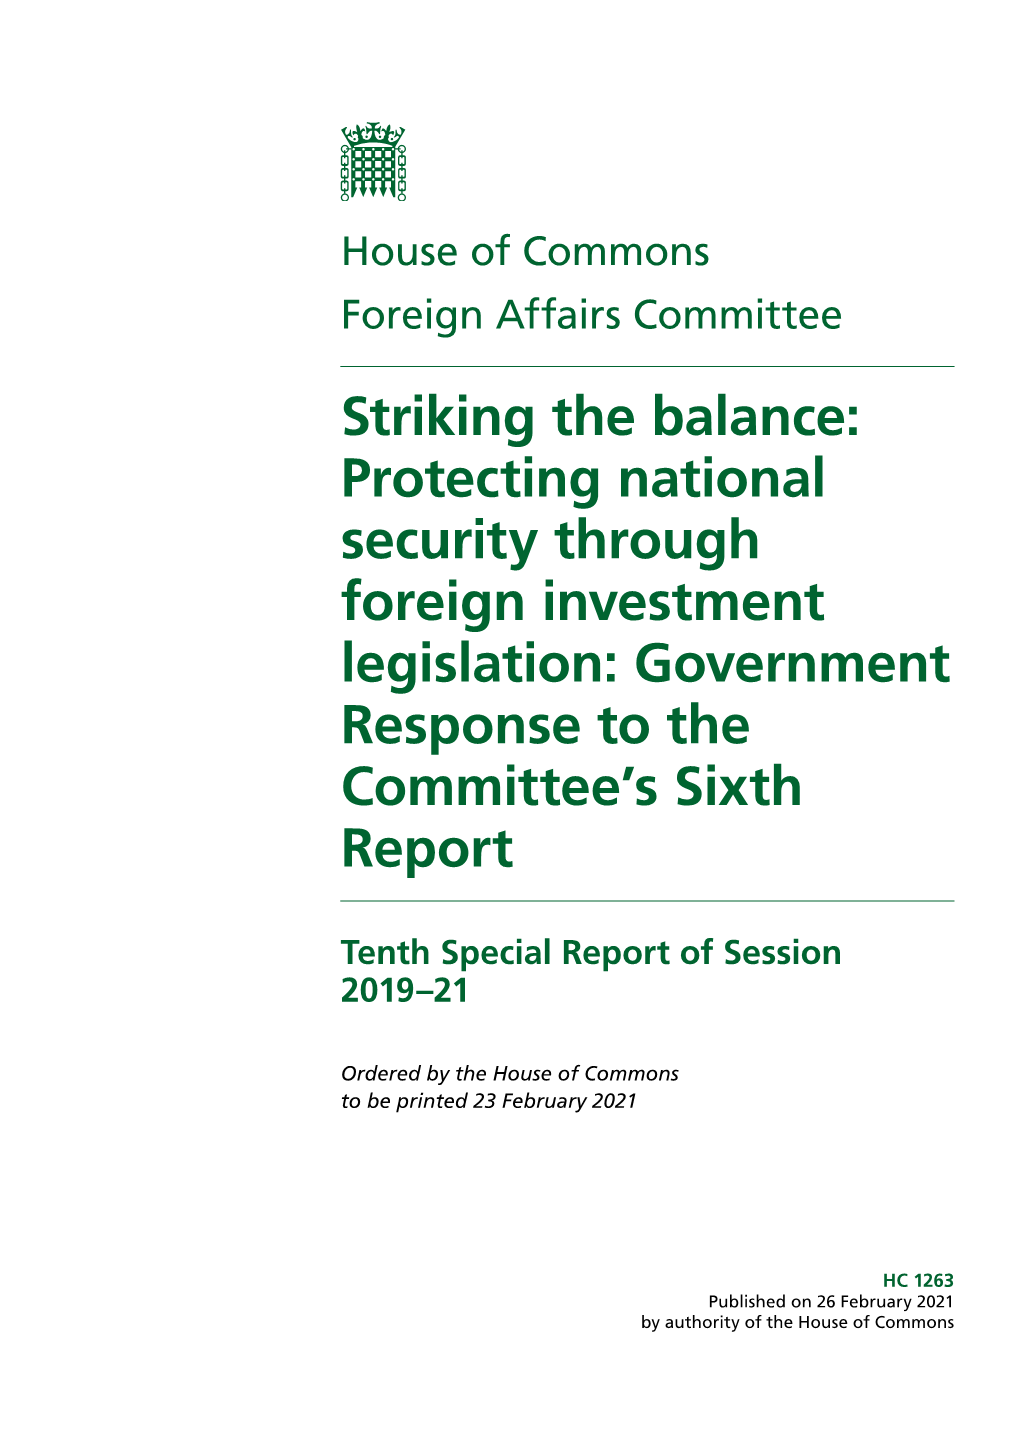 Striking the Balance: Protecting National Security Through Foreign Investment Legislation: Government Response to the Committee’S Sixth Report